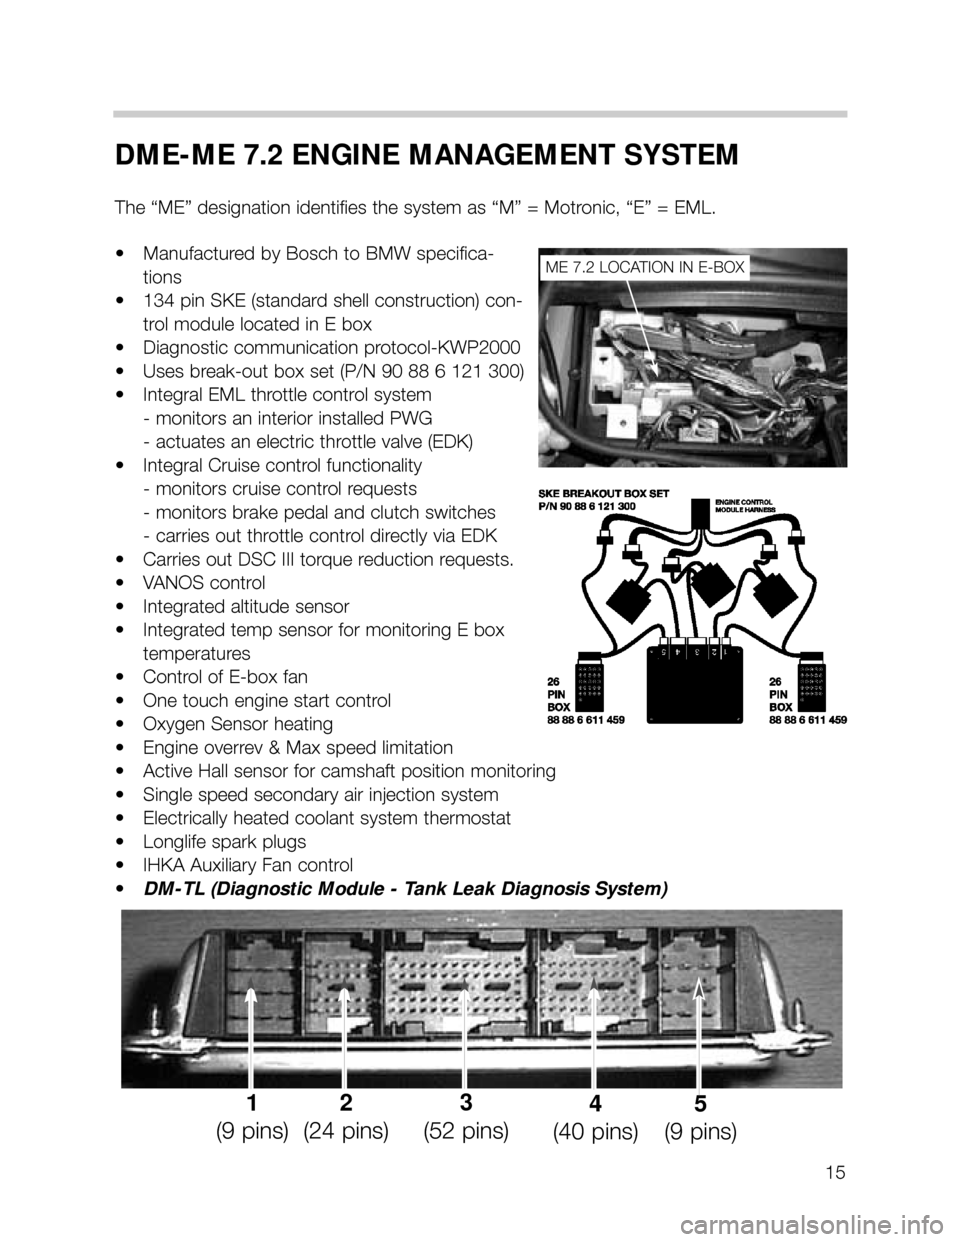 BMW 535i 2001 E39 M62TU Engine Workshop Manual 15
DME-ME 7.2 ENGINE MANAGEMENT SYSTEM
The “ME” designation identifies the system as “M” = Motronic, “E” = EML.
• Manufactured by Bosch to BMW specifica-
tions
• 134 pin SKE (standard 